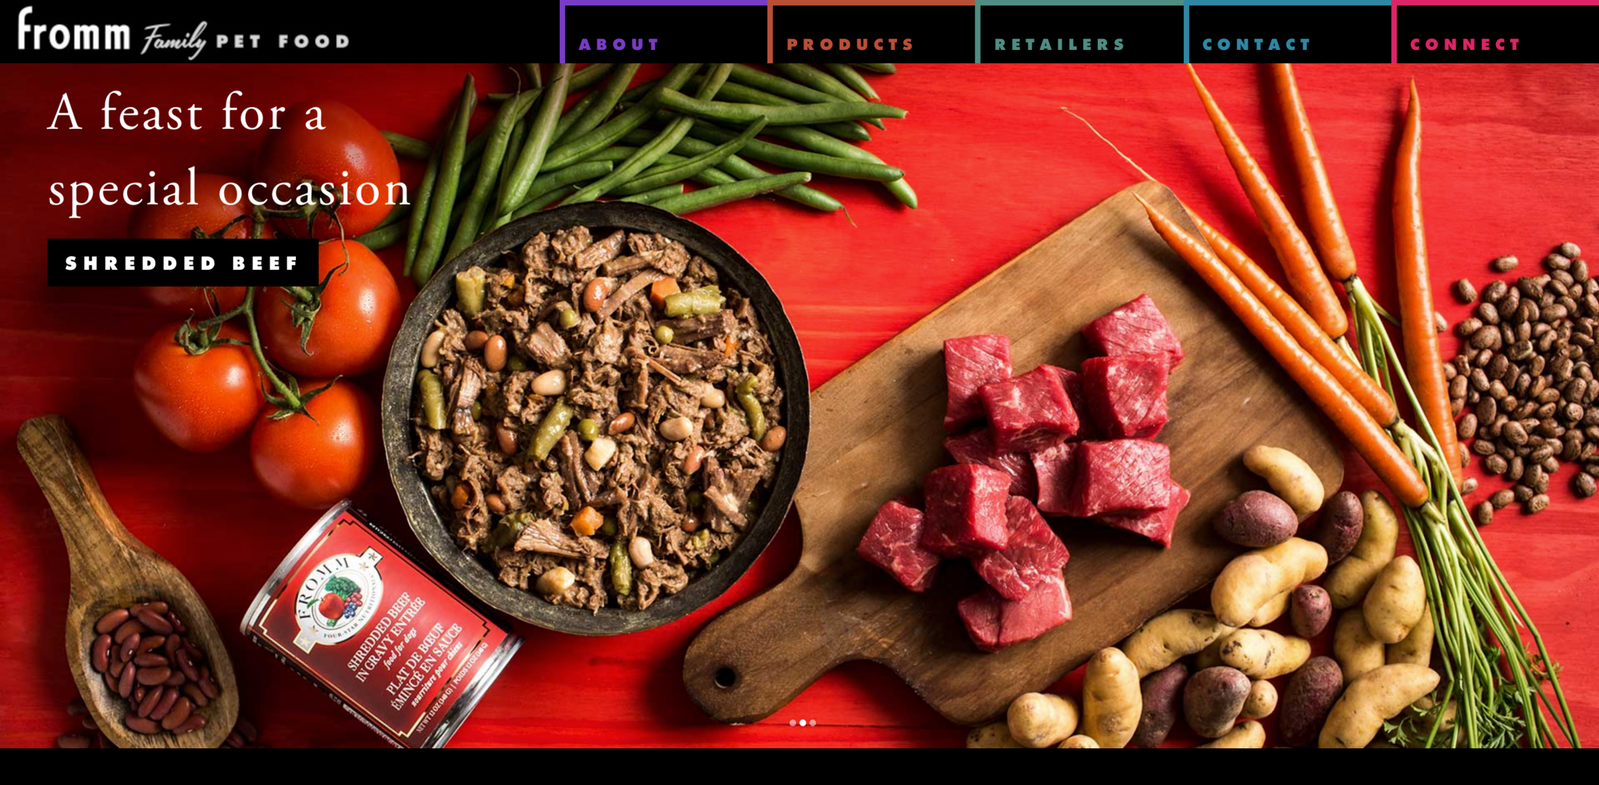 Website homepage banner with fresh ingredients on a red surface, plated wet dog food, and can of dog food. Overhead flat lay meat food photography